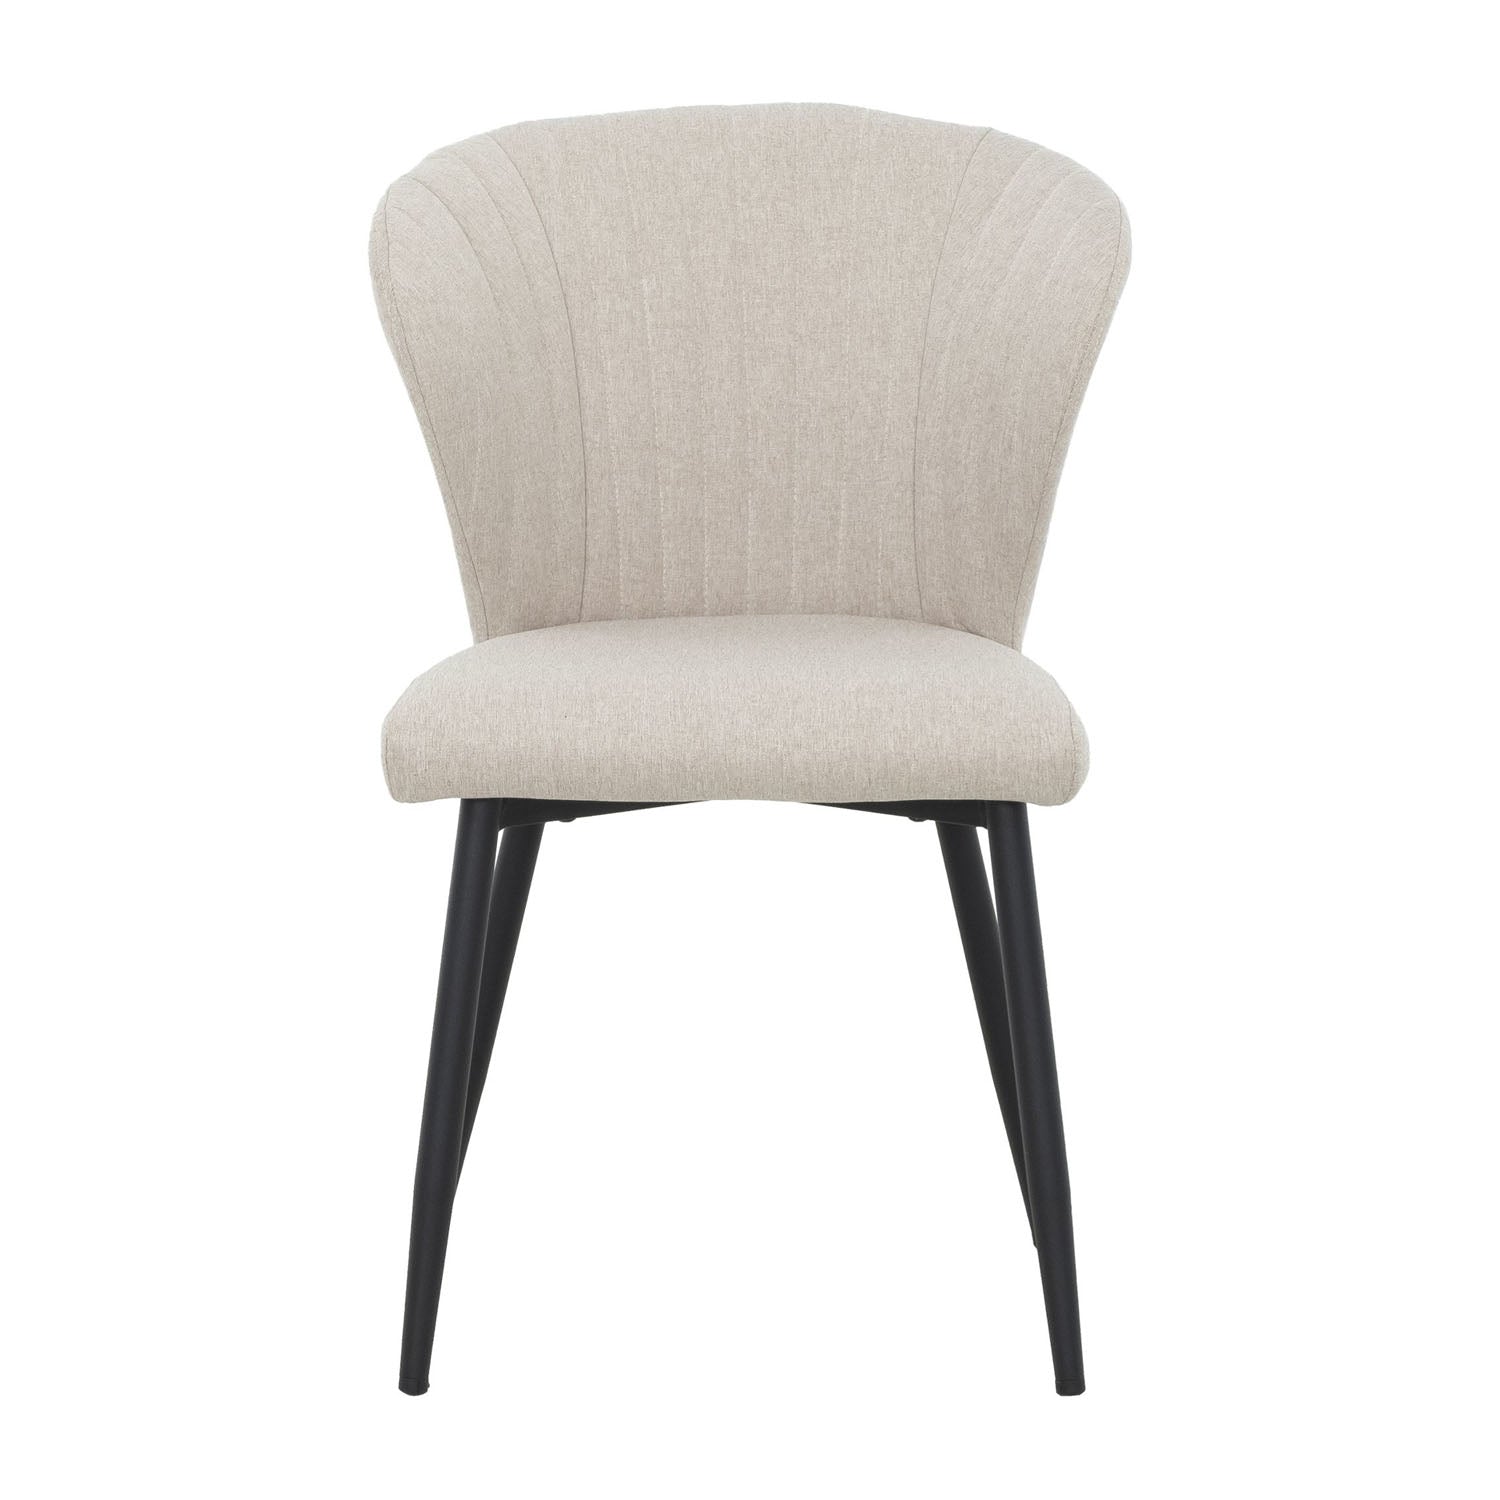 Oat Dining Chair - MJM Furniture